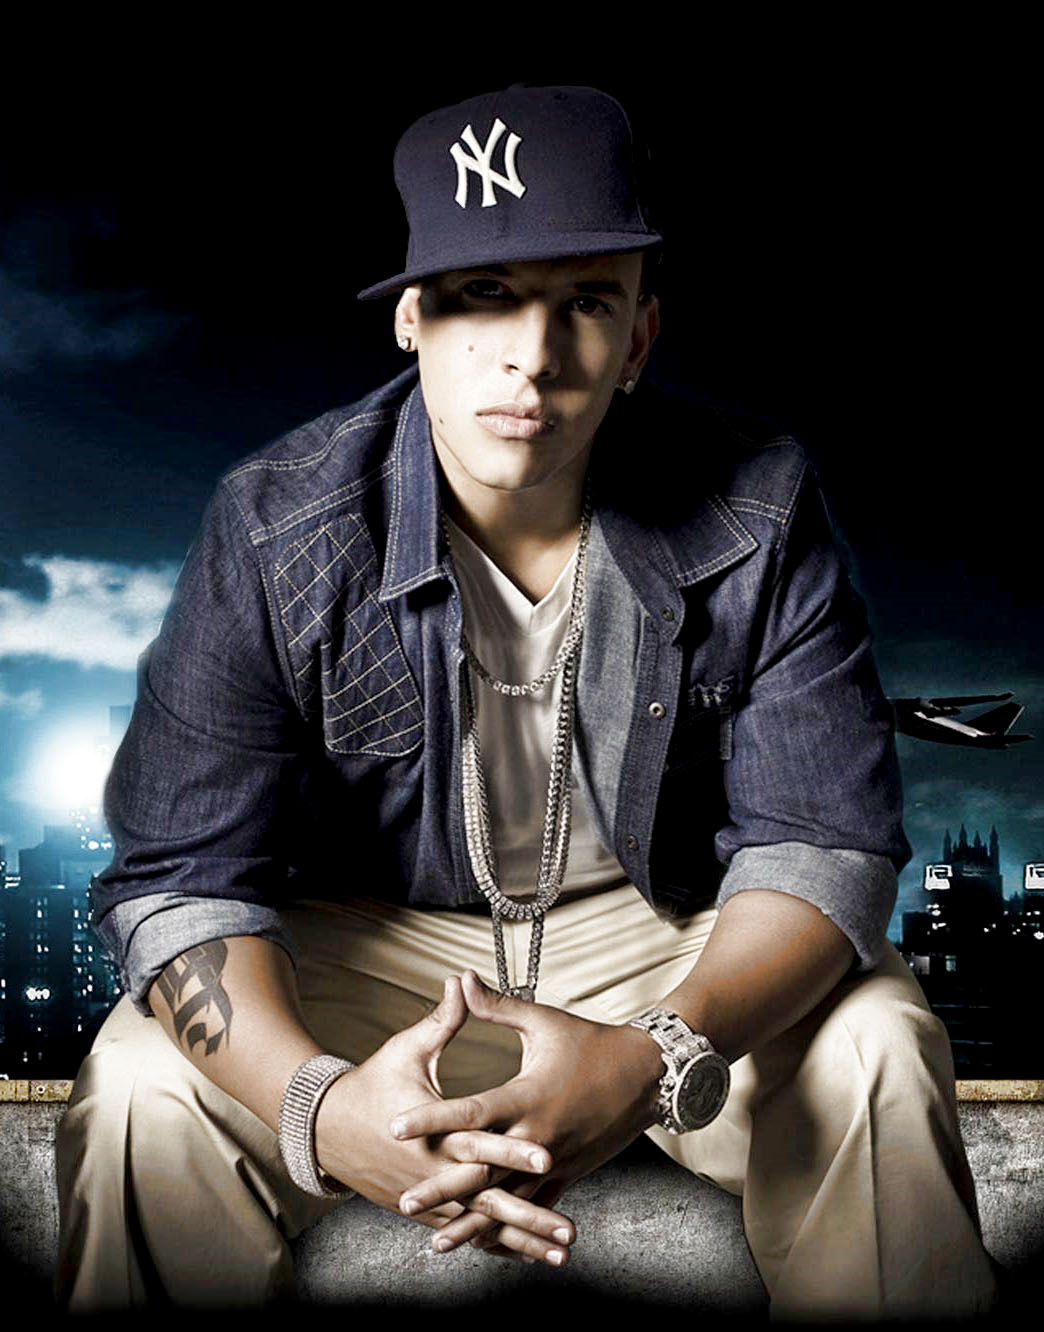 Daddy Yankee Backgrounds, Compatible - PC, Mobile, Gadgets| 1044x1332 px